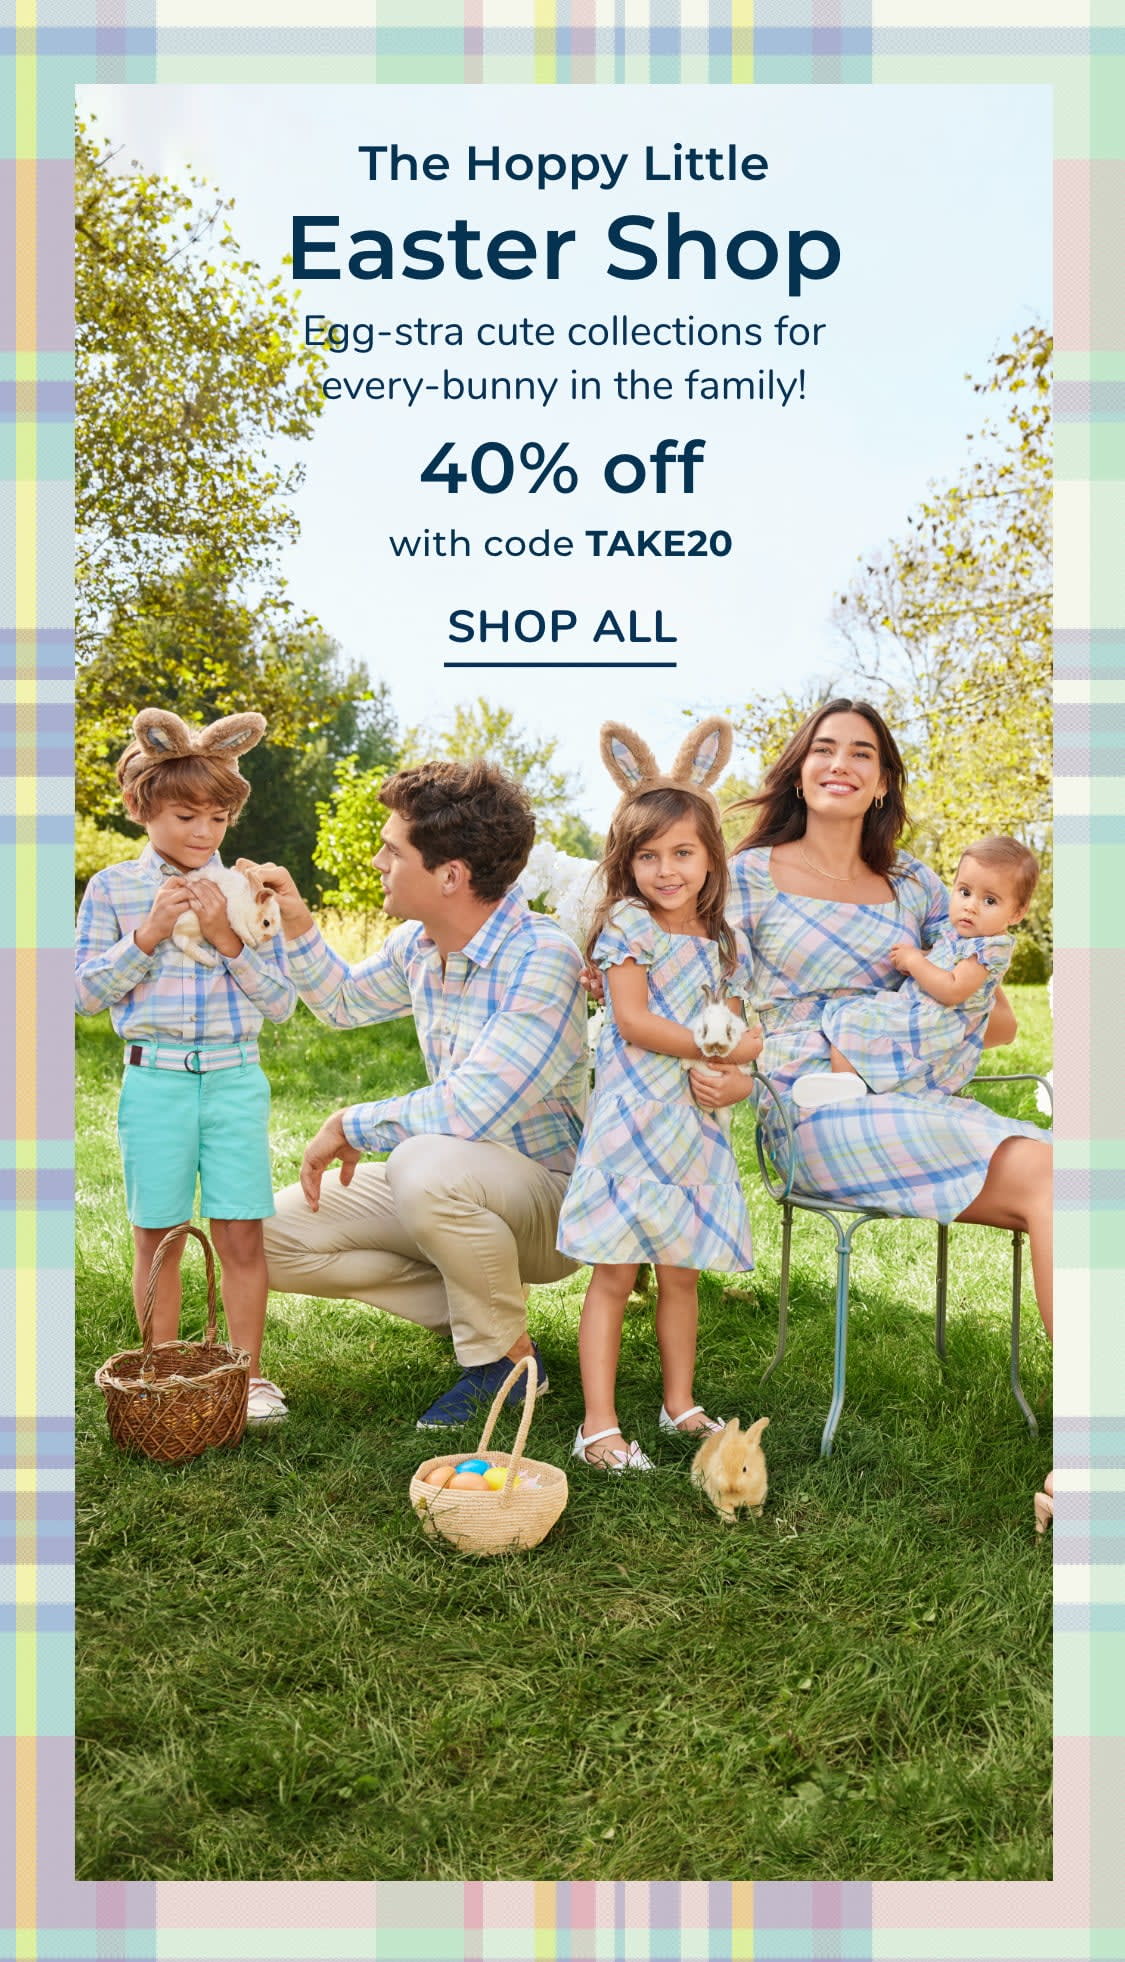 The Hoppy Little Easter Shop | Egg-stra cute collections for every-bunny in the family! 40% off with code TAKE20